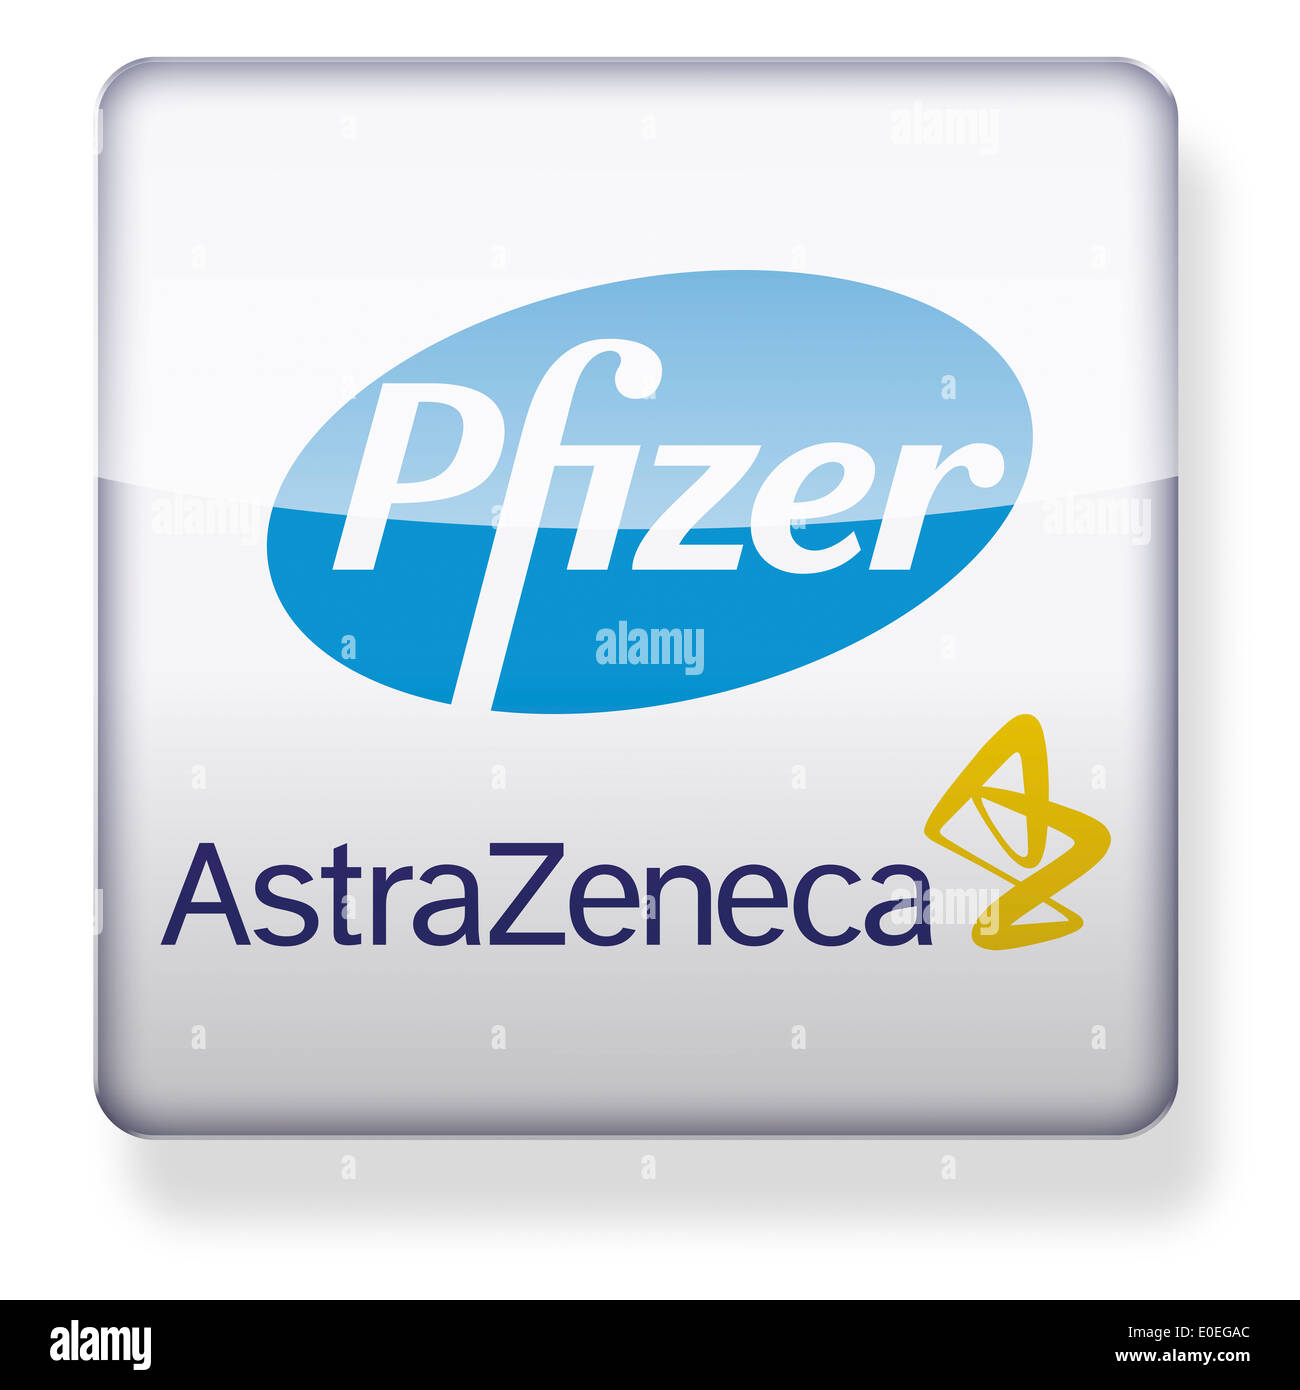 Pfizer and AstraZeneca logos as an app icon. Clipping path included. Stock Photo